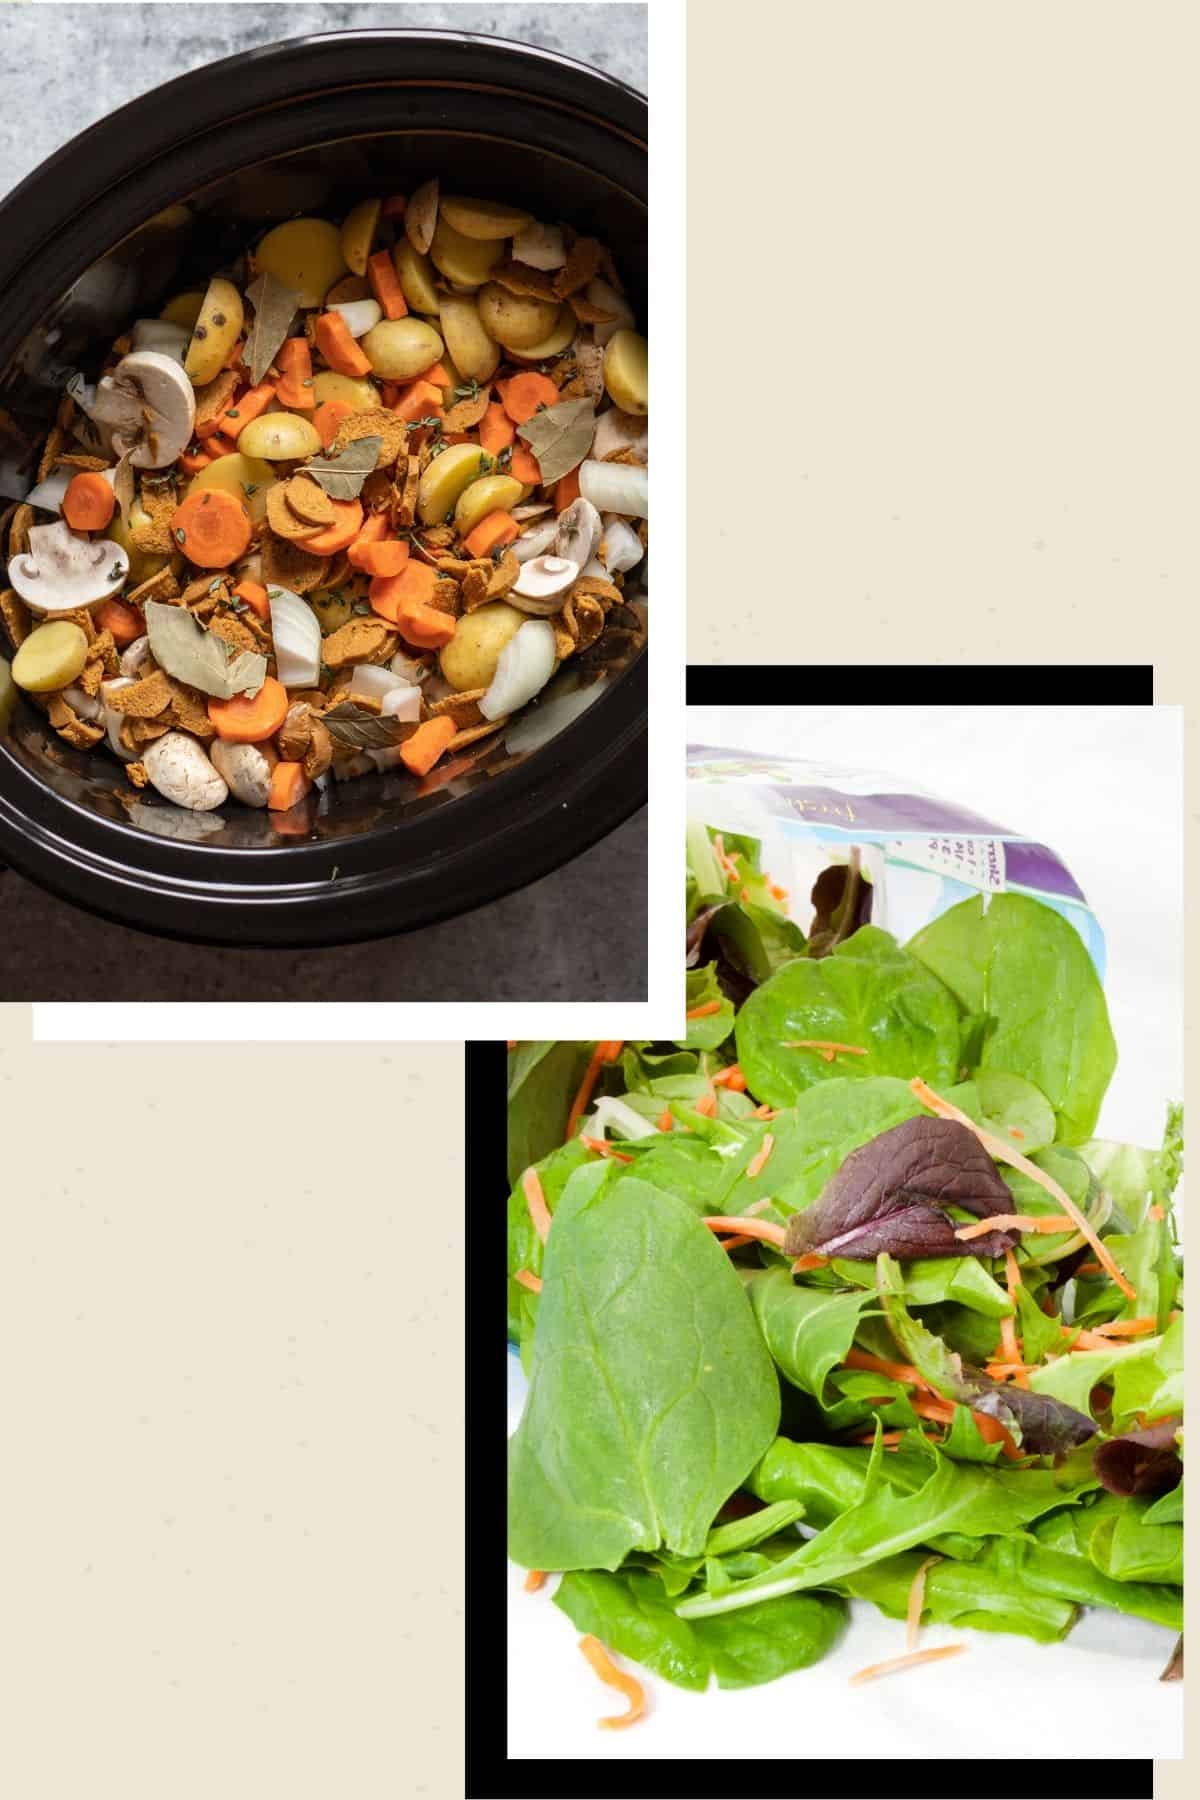 Collage of images of a crockpot meal and a bagged salad.